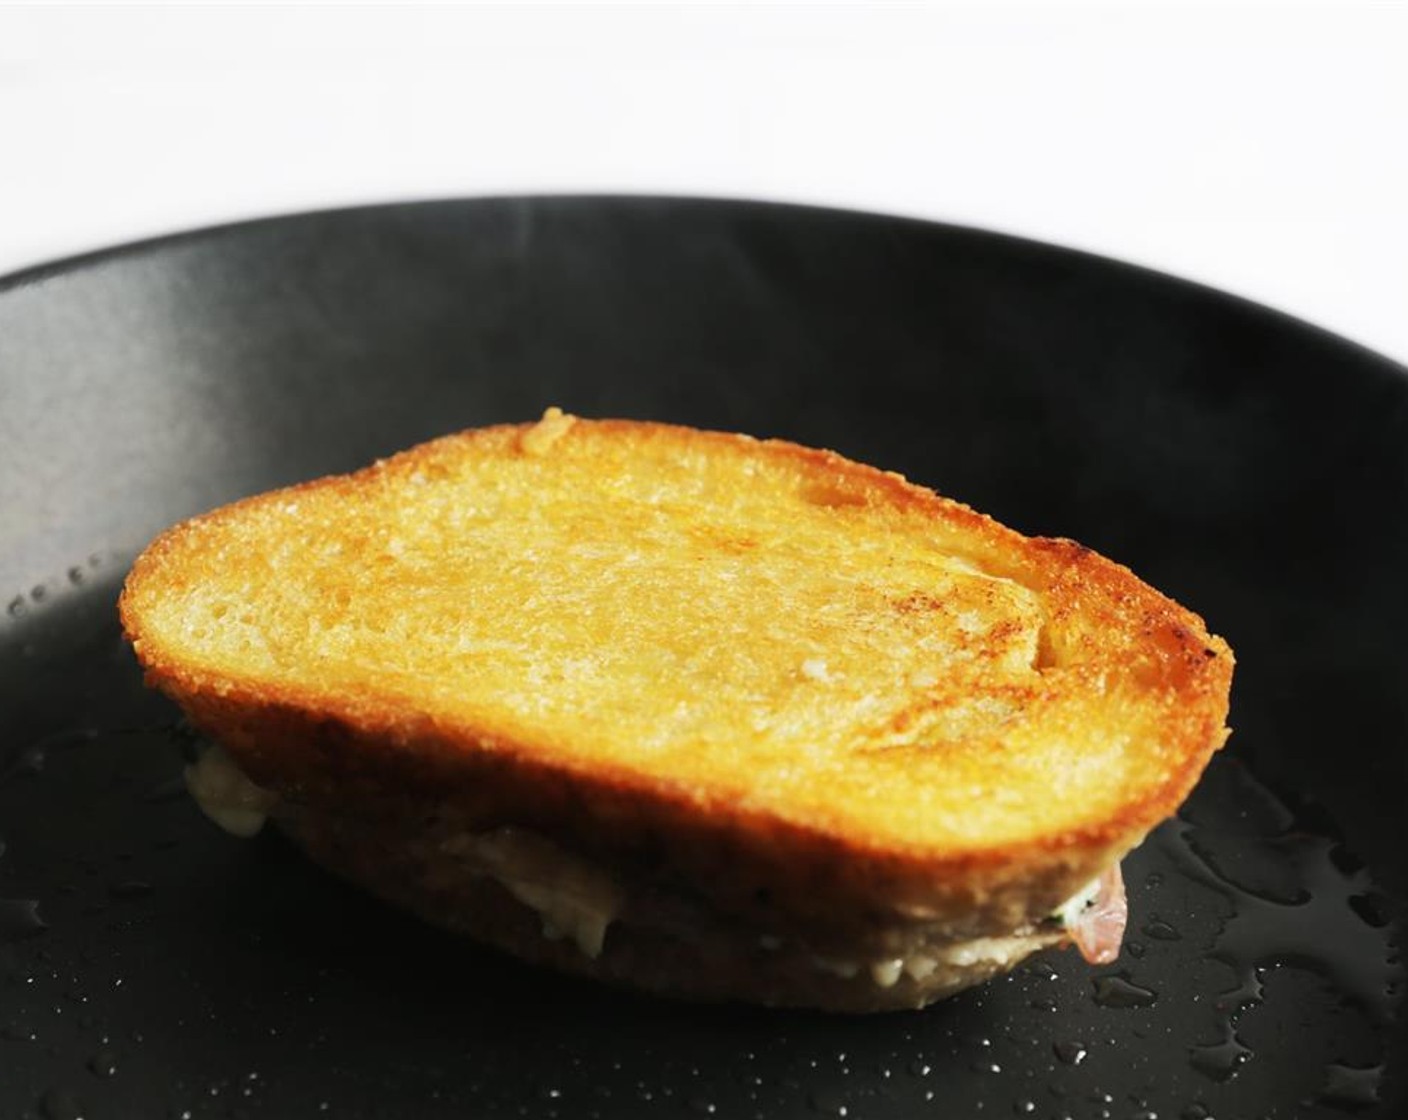 step 12 When underside is golden brown, about 4 minutes, turn sandwich and cook for another 4 minutes until both sides are golden brown.